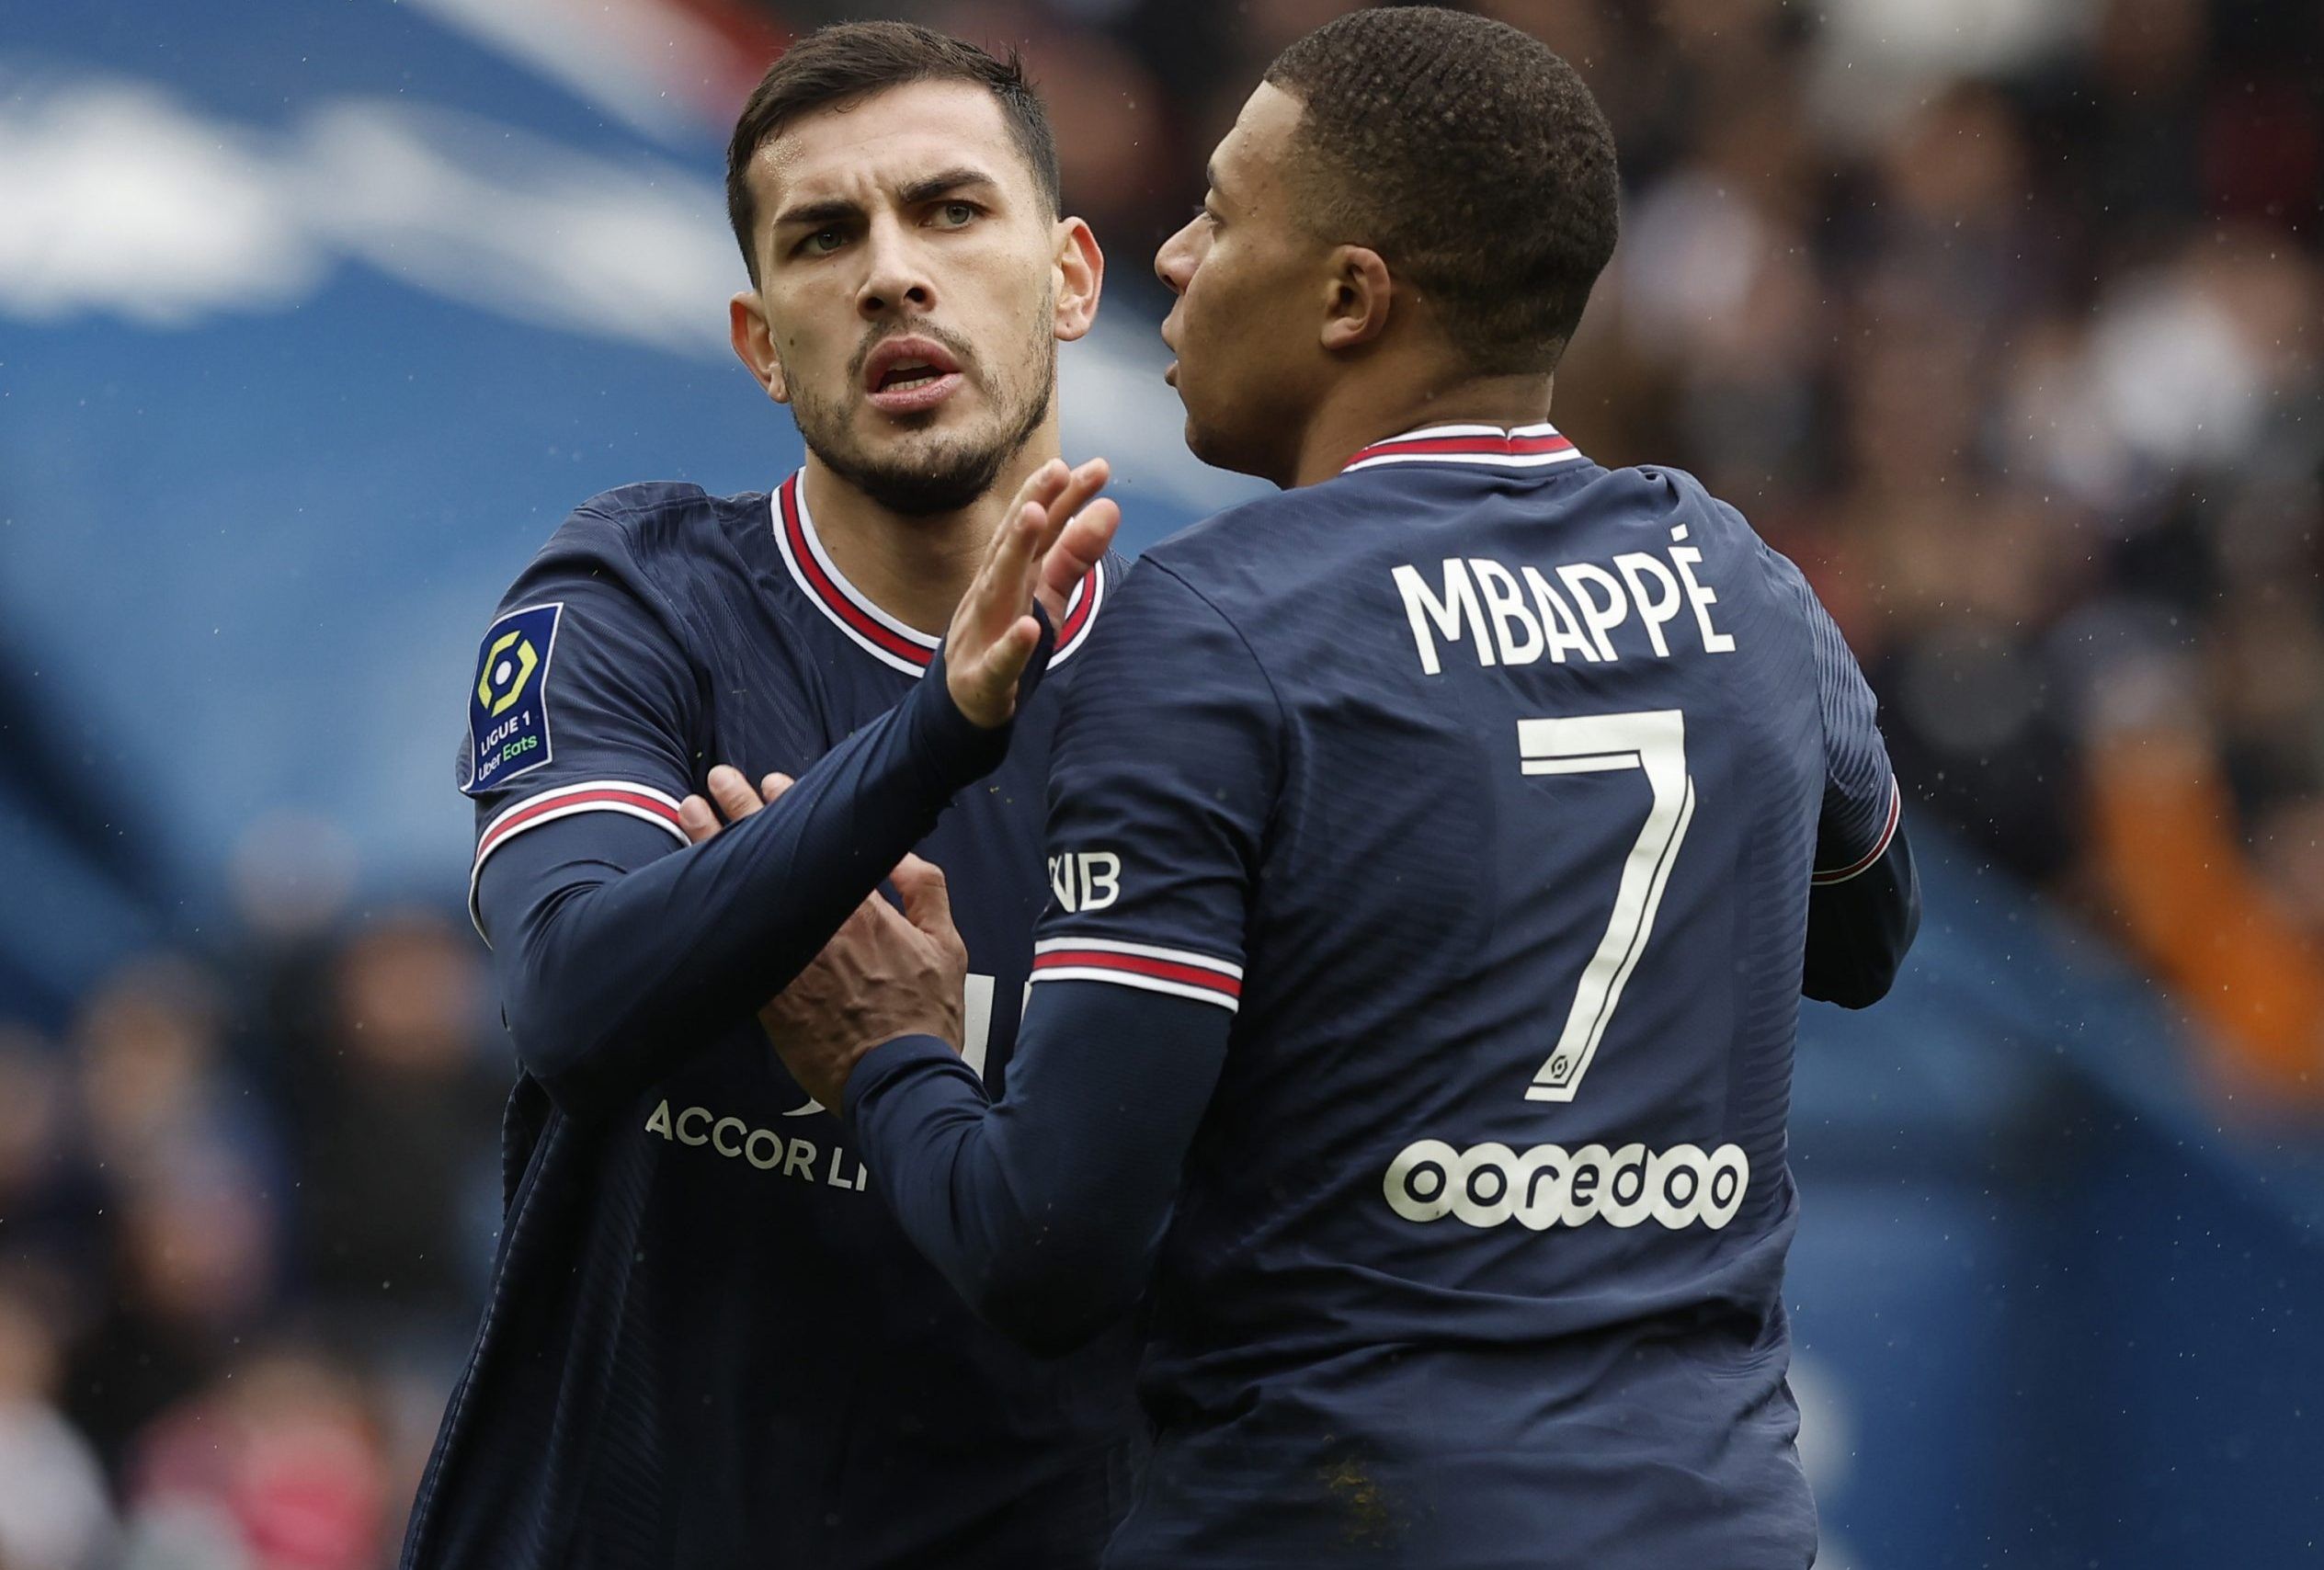 PSG midfielder Leandro Paredes celebrates with Kylian Mbappe